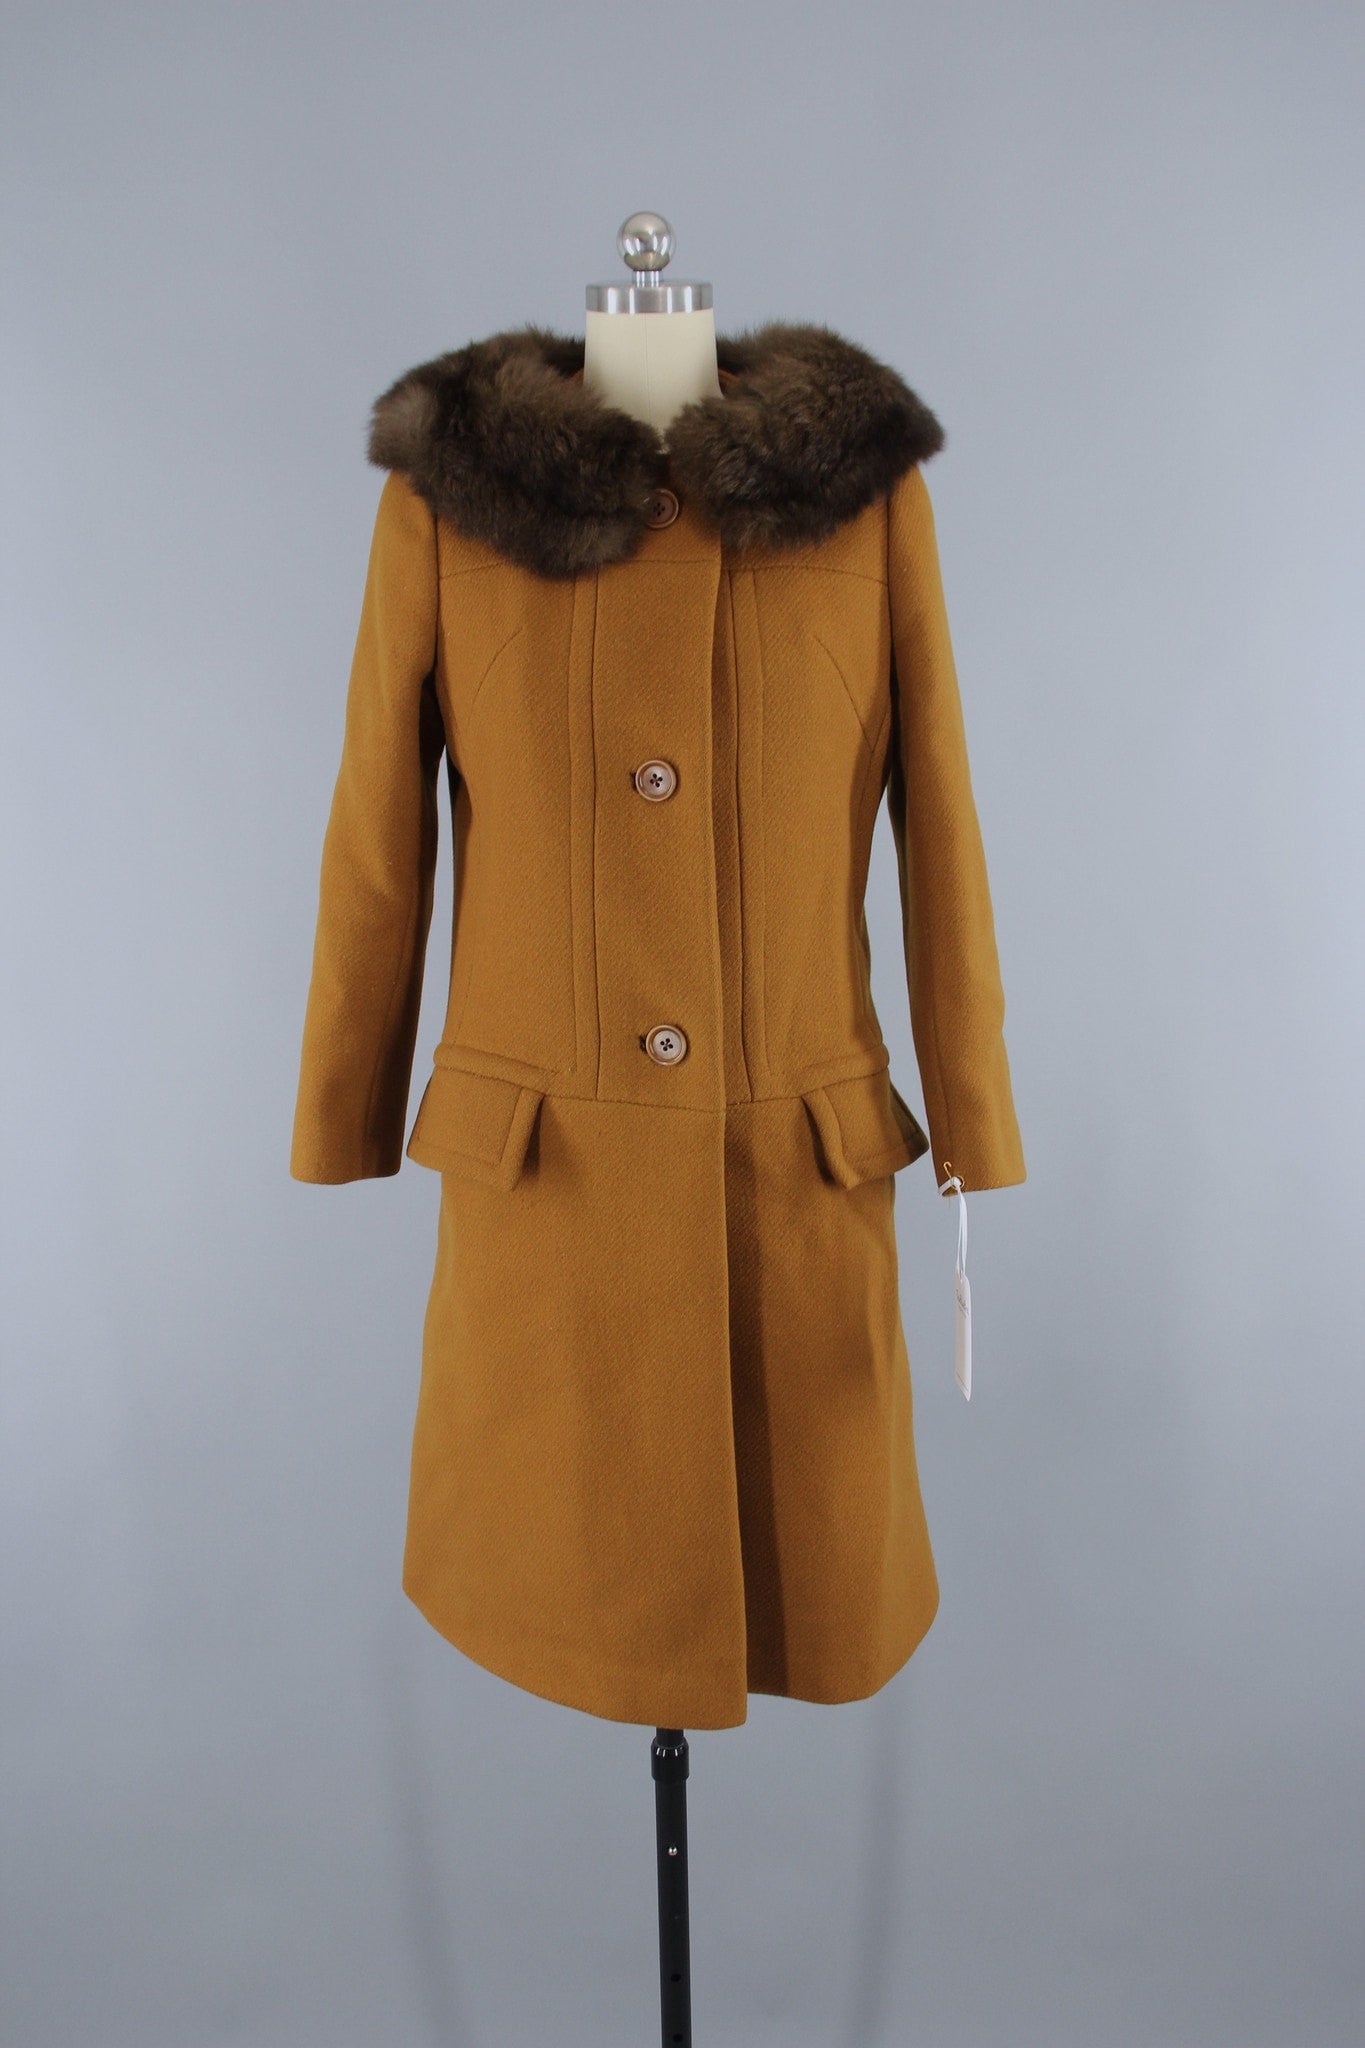 Vintage 1960s Caramel Brown Wool Coat with Fur Collar - ThisBlueBird